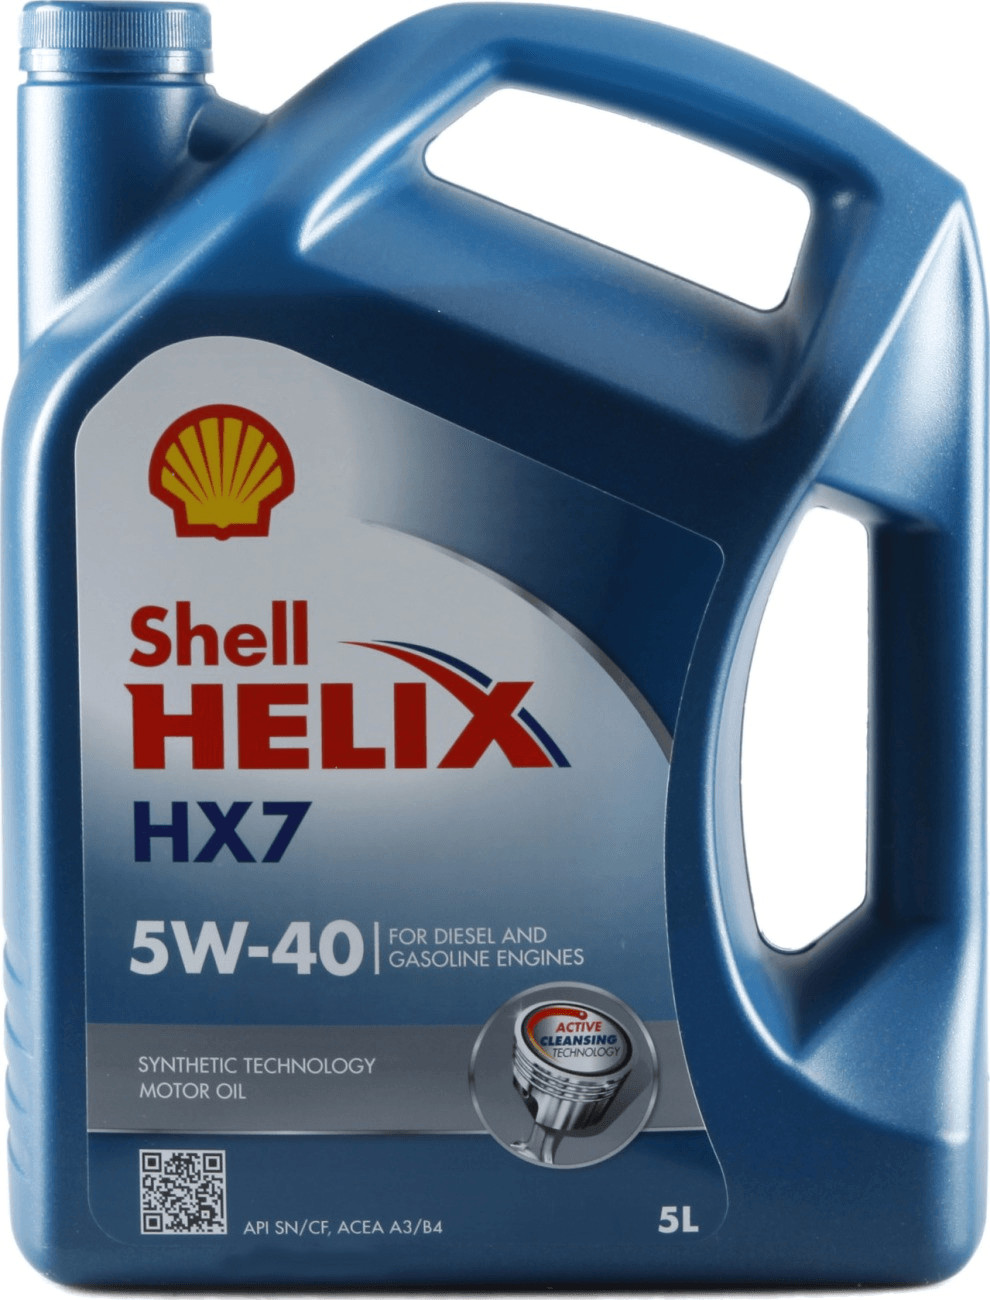 Масло shell helix 5 40. Shell Helix Ultra 5w40 5л. Shell Helix Ultra 5w-40, 4 л. Шелл Хеликс hx7 5w40 Diesel. Масло моторное Shell Helix HX 7 5w40.